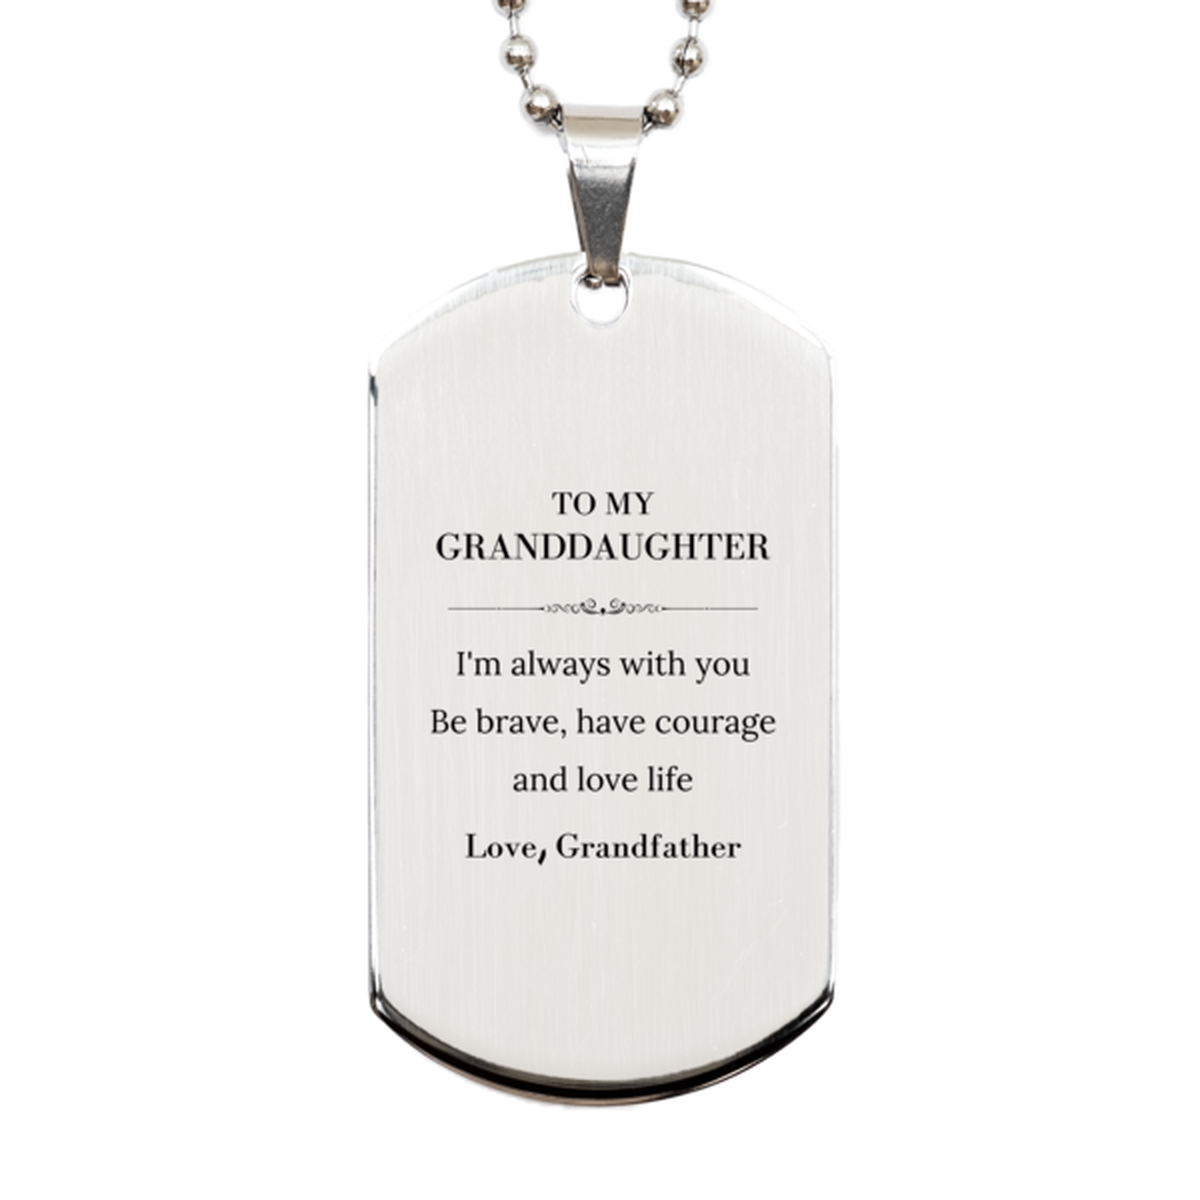 To My Granddaughter Gifts from Grandfather, Unique Silver Dog Tag Inspirational Christmas Birthday Graduation Gifts for Granddaughter I'm always with you. Be brave, have courage and love life. Love, Grandfather